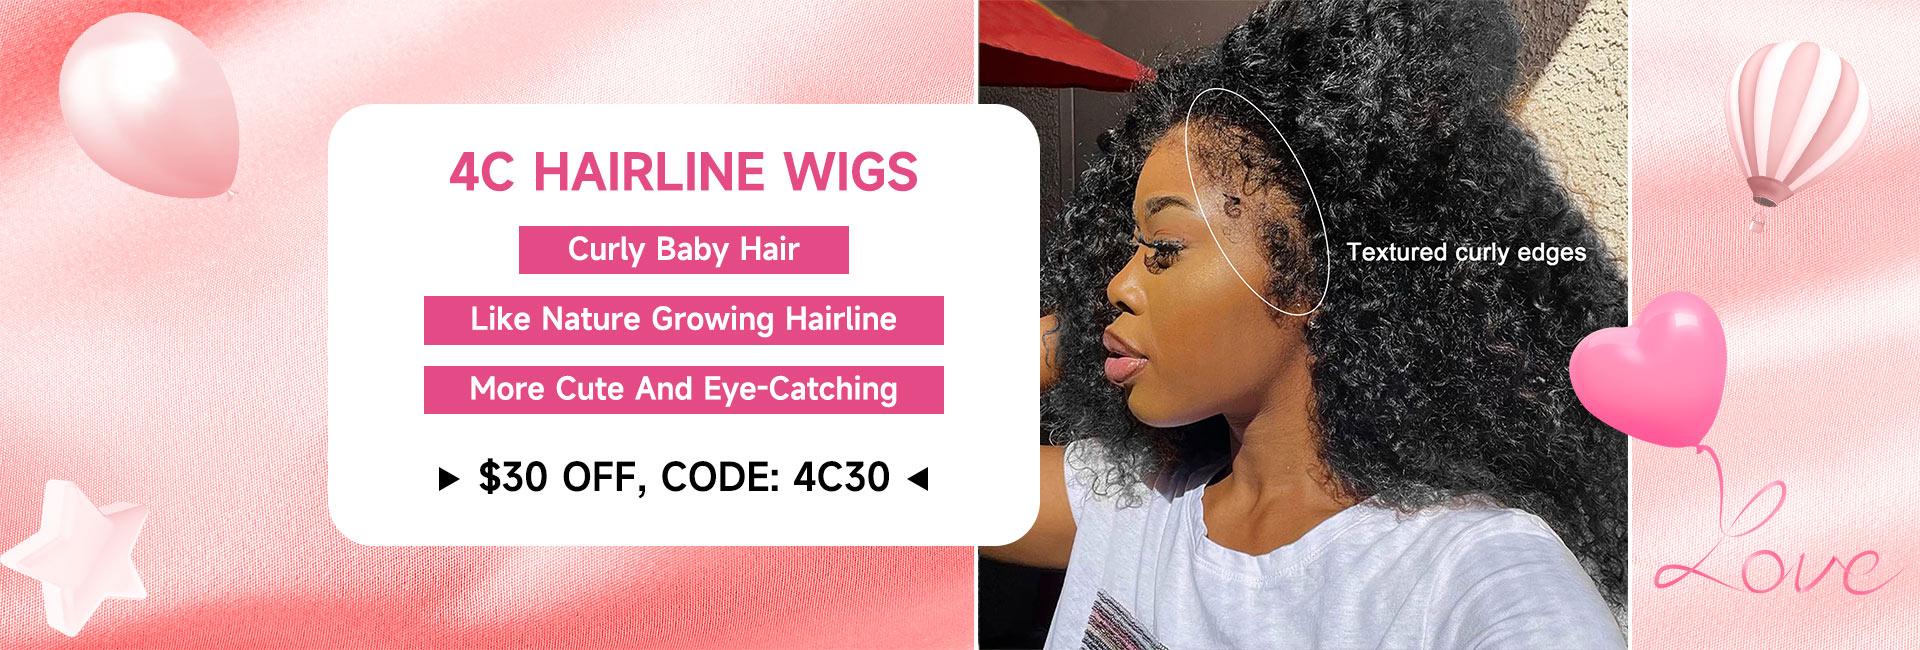 4C hairline wigs